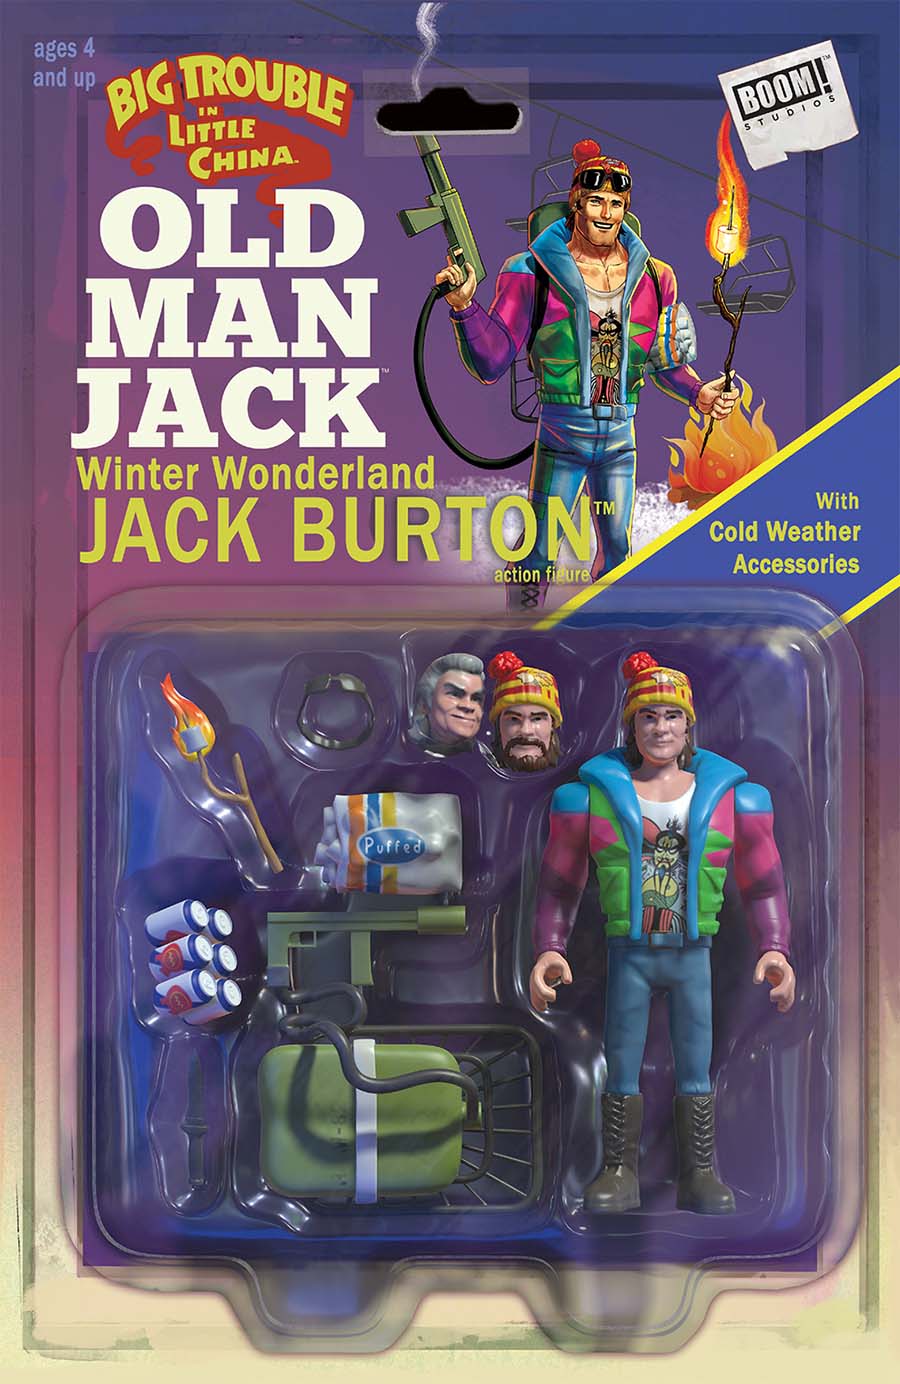 Big Trouble In Little China Old Man Jack #3 Cover C Variant Michael Adams & Marco DAlfonso Action Figure Subscription Cover